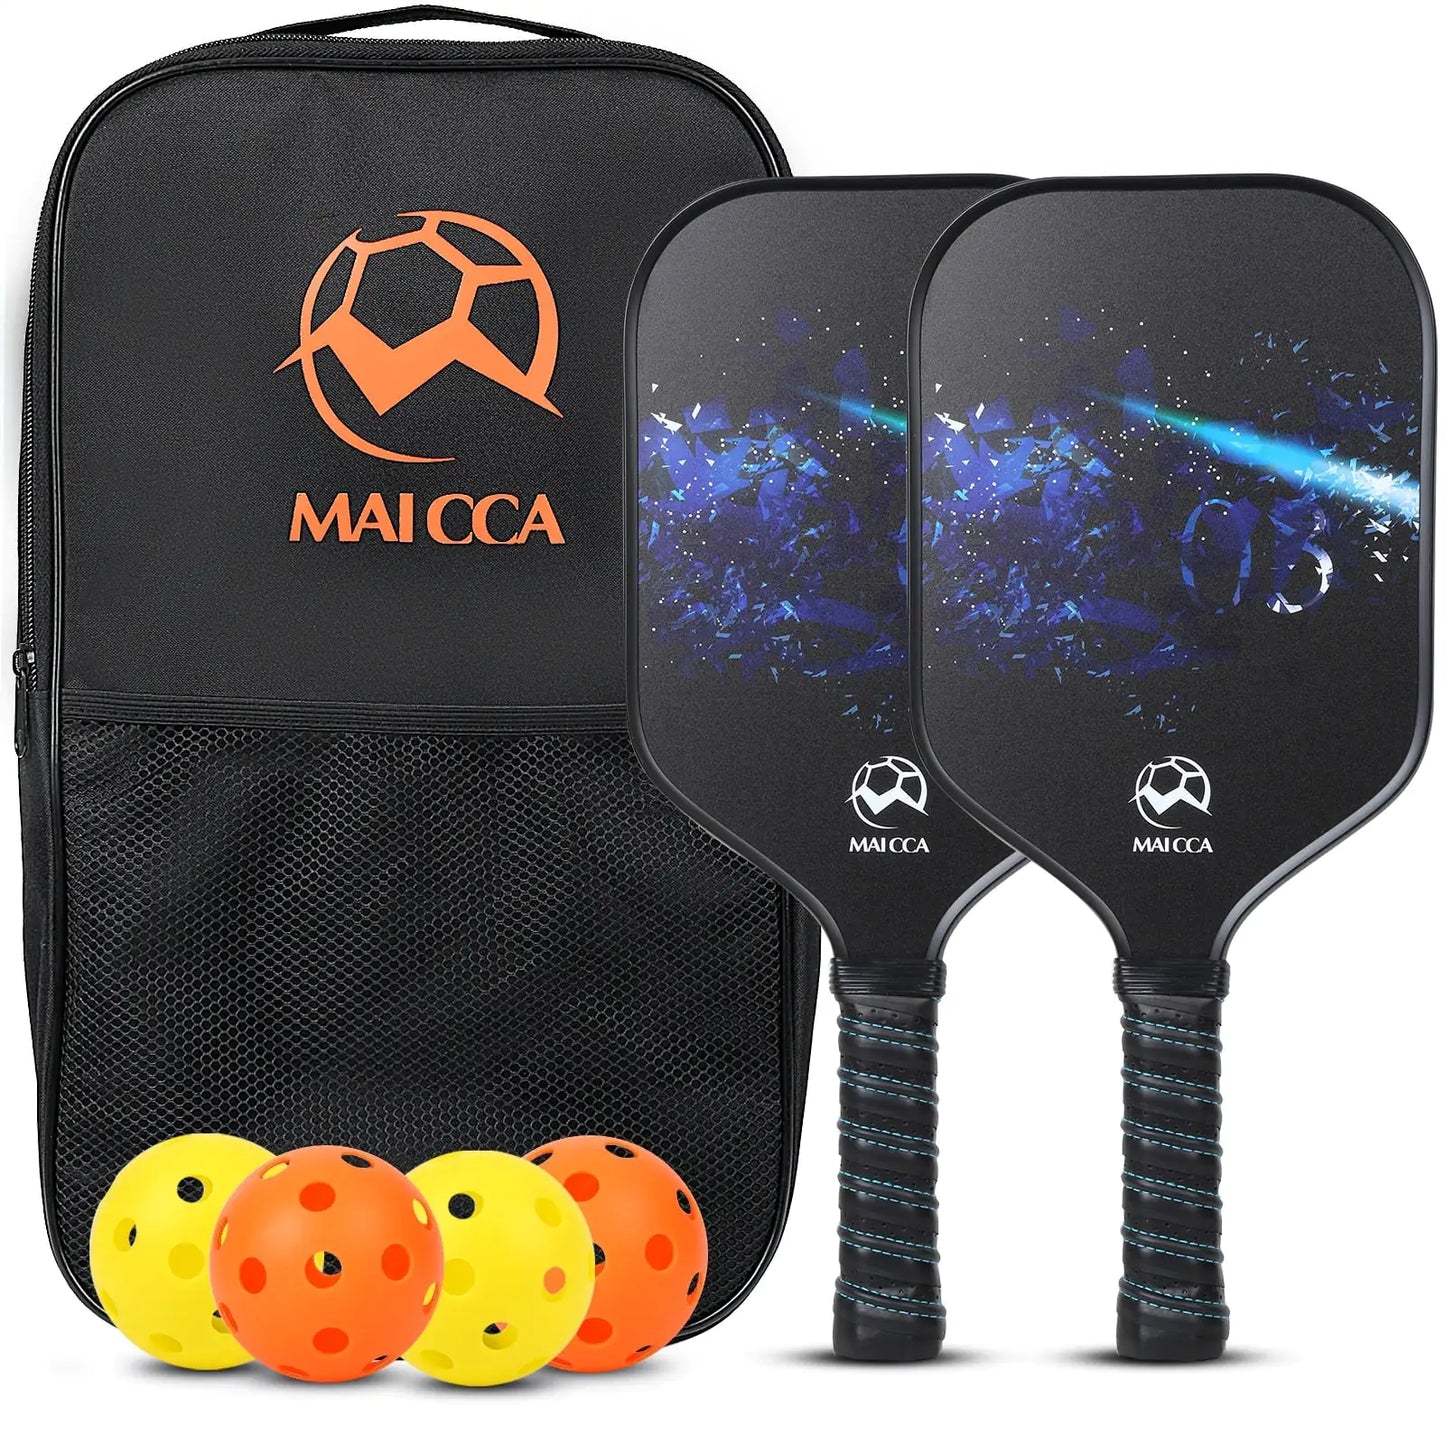 Lifting Relief Pickleball paddle sets